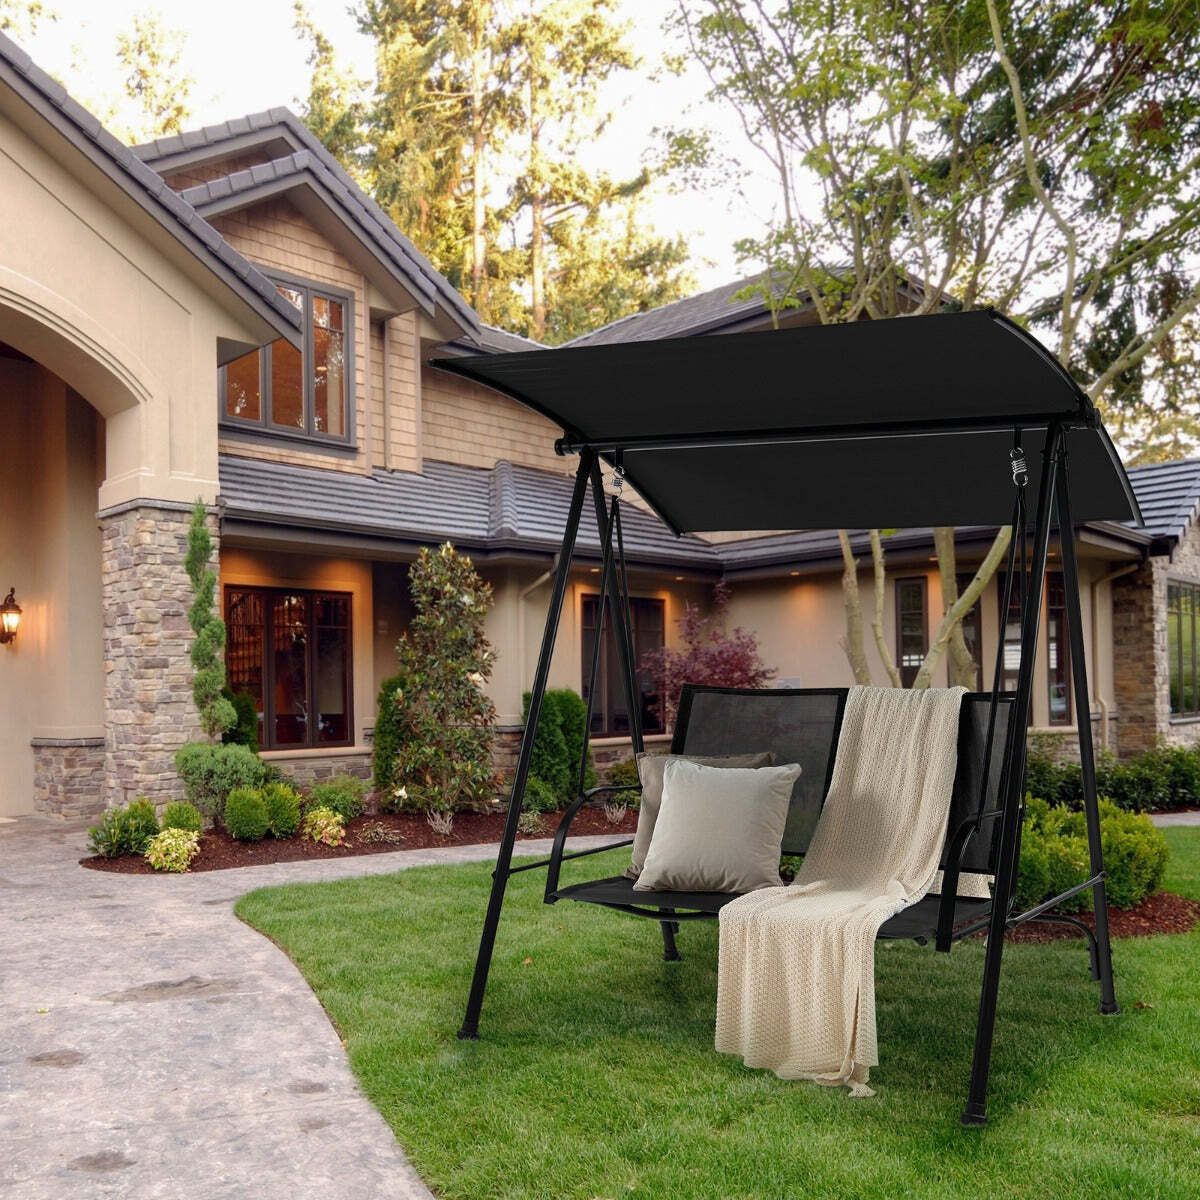 NNECW 2-seat Outdoor Swing with Adjustable Canopy for Patio/Garden-Black